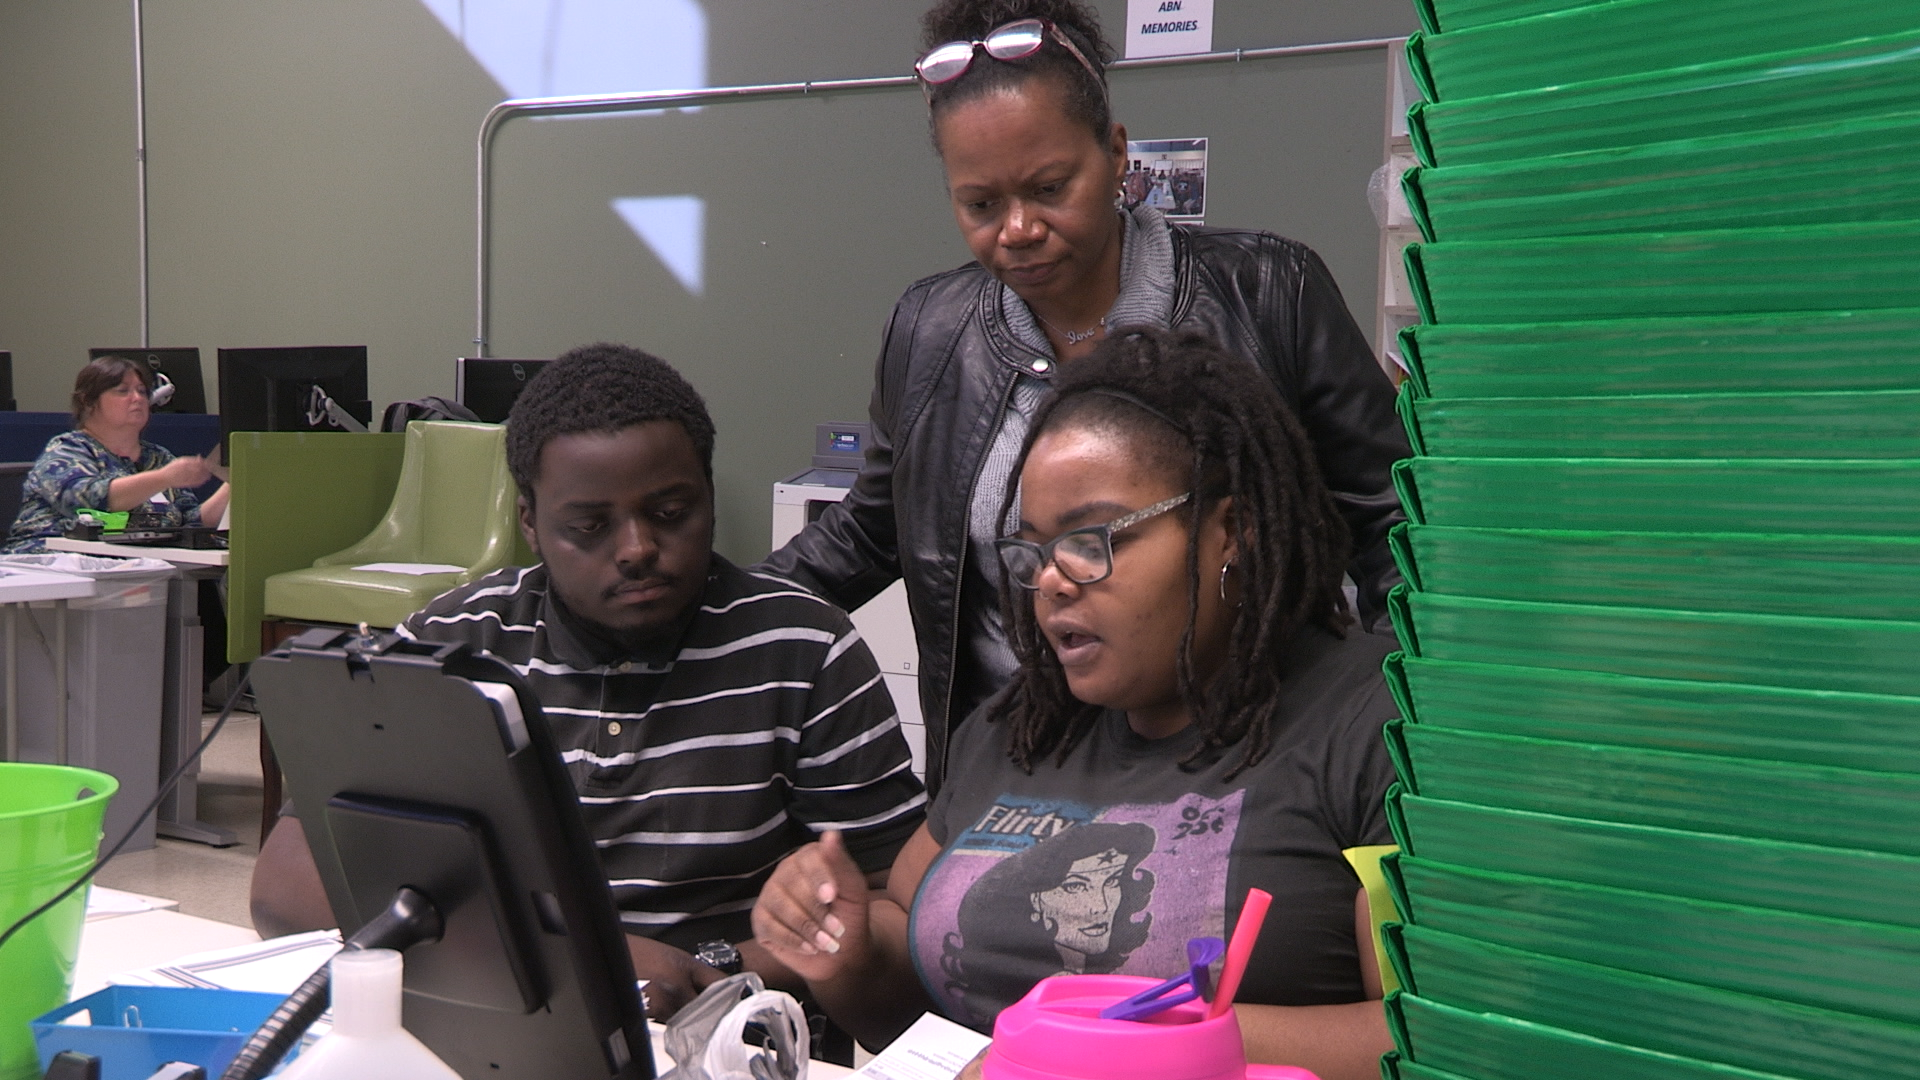 A young Black male in a stripped shirt sits next to his classmate, a young Black female who are working on the computer.